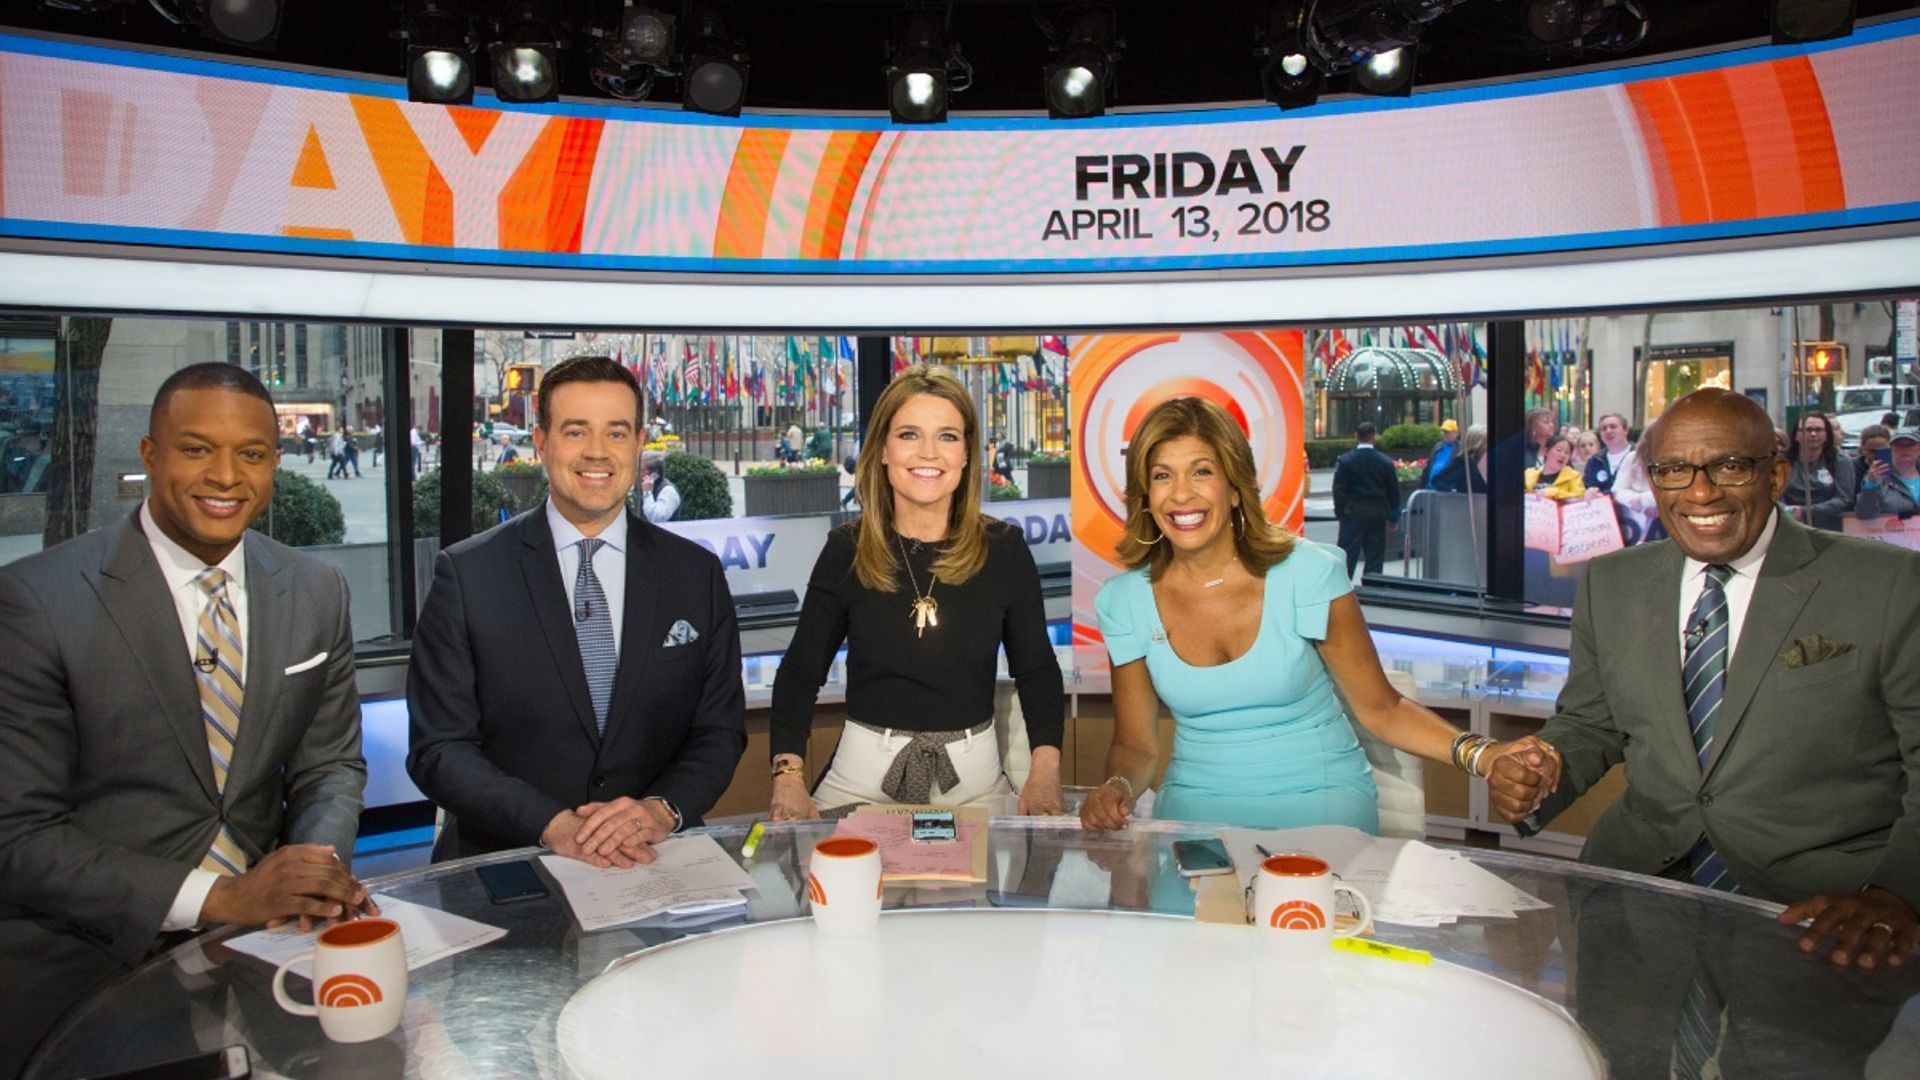 Savannah Guthrie and Hoda Kotb reunite with Today team for special occasion